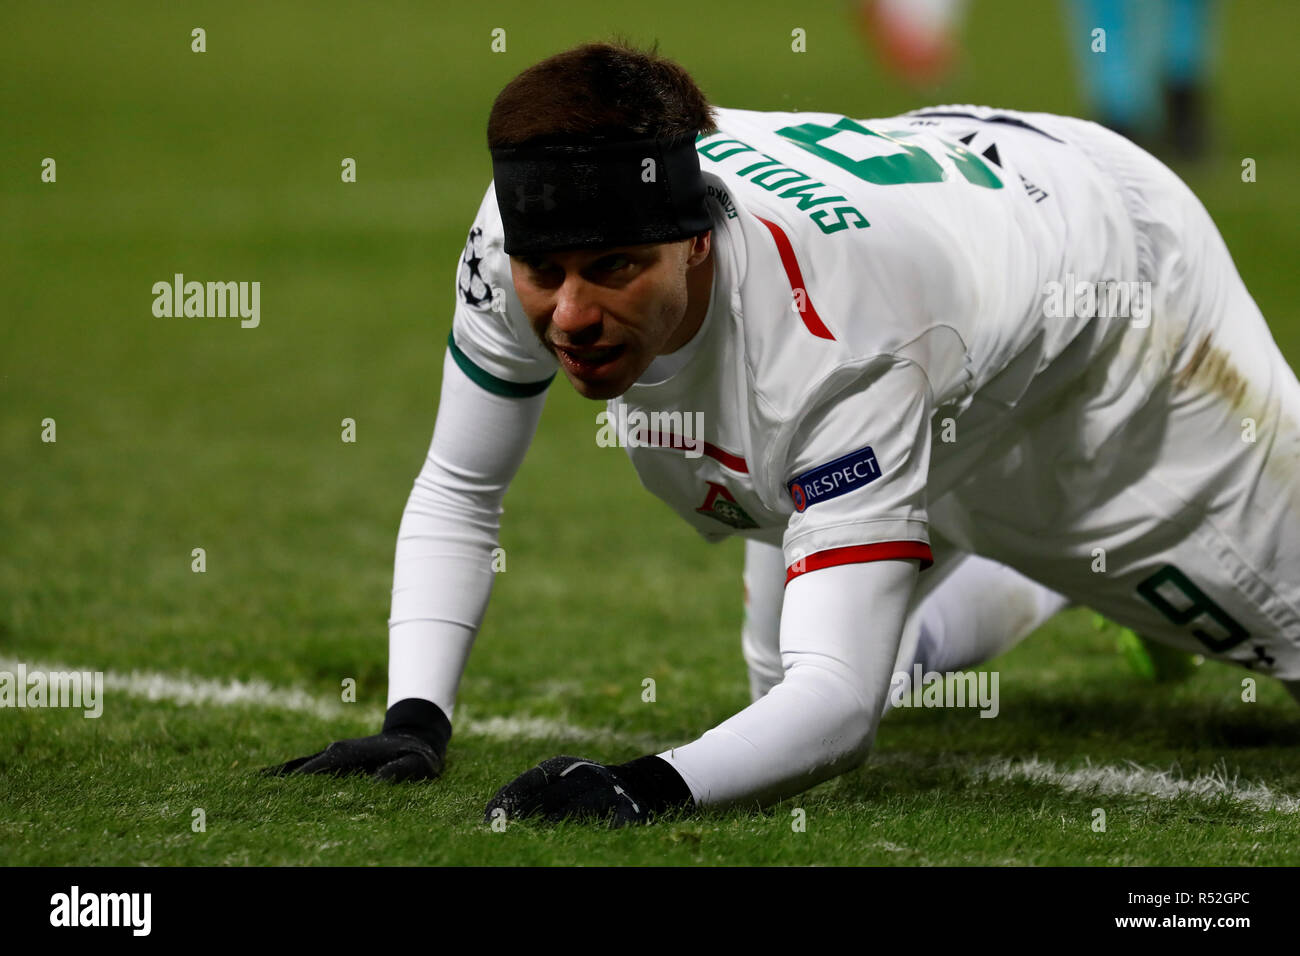 MOSCOW, RUSSIA - NOVEMBER 28: Fedor Smolov of FC Lokomotiv Moscow during the Group D match of the UEFA Champions League between FC Lokomotiv Moscow and Galatasaray at Lokomotiv Stadium on November 28, 2018 in Moscow, Russia. (MB Media) Stock Photo